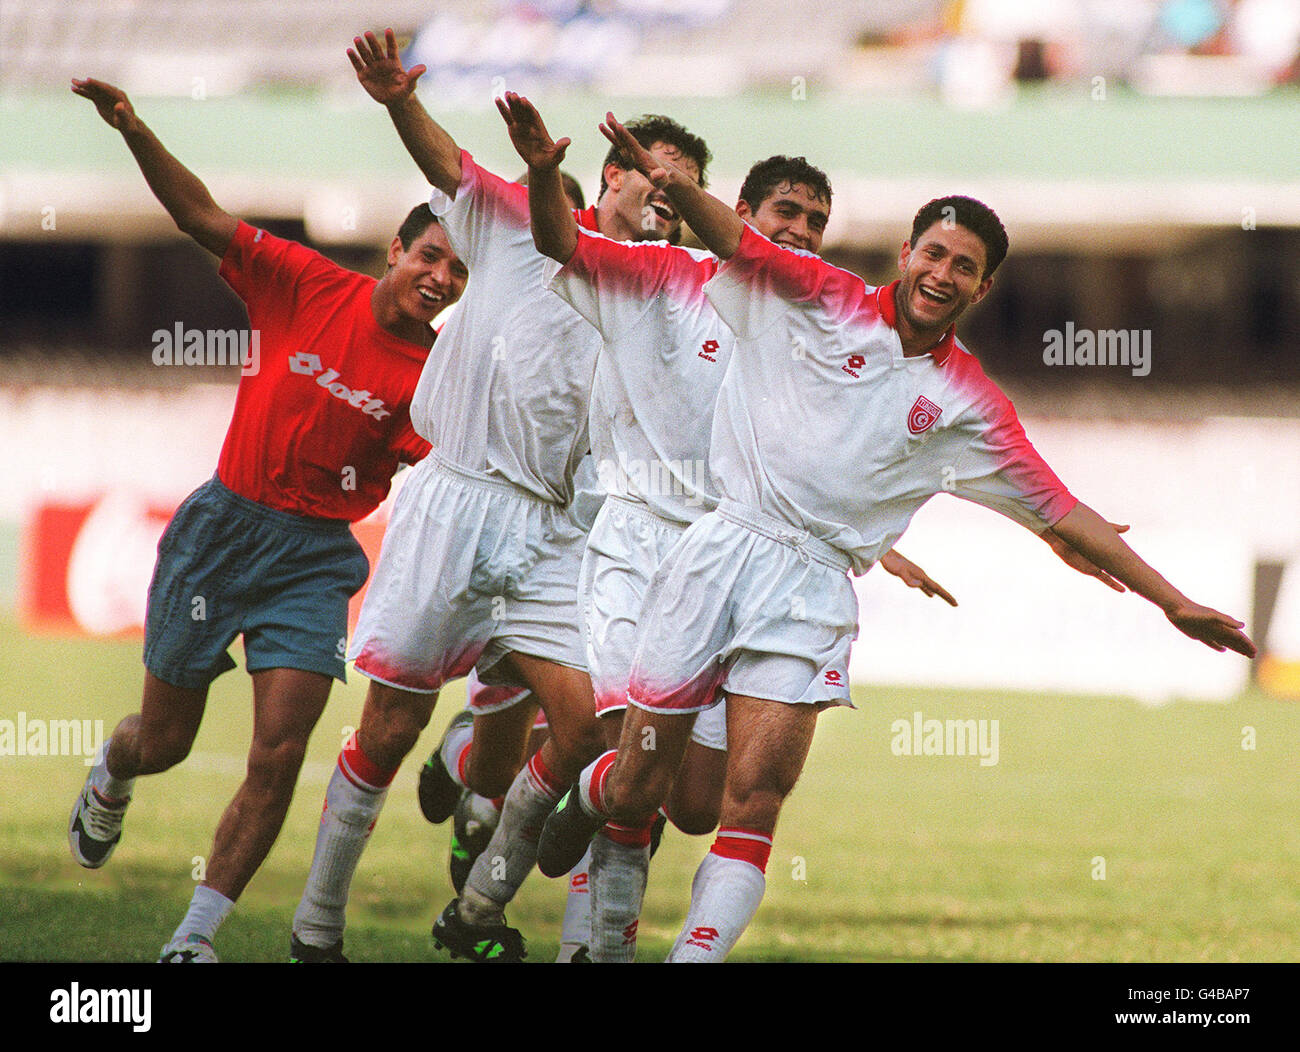 1998 World Cup AFP PHOTO Tunisia's Zoubeir Beya leads his teammates in celebration after beating Zambia 4-2 during their African Nations Cup semi-final 31 January in Durban (South Africa). AFP/Philip LITTLETON Le Tunisien Zoubeir Beya (D) c l bre avec ses co quipiers la victoire  (4-2) de son  quipe contre la Zambie, le 31 janvier   Durban (AfS), en demi-finale de la Coupe d'Afrique des Nations. AFP/Philip LITTLETON Stock Photo